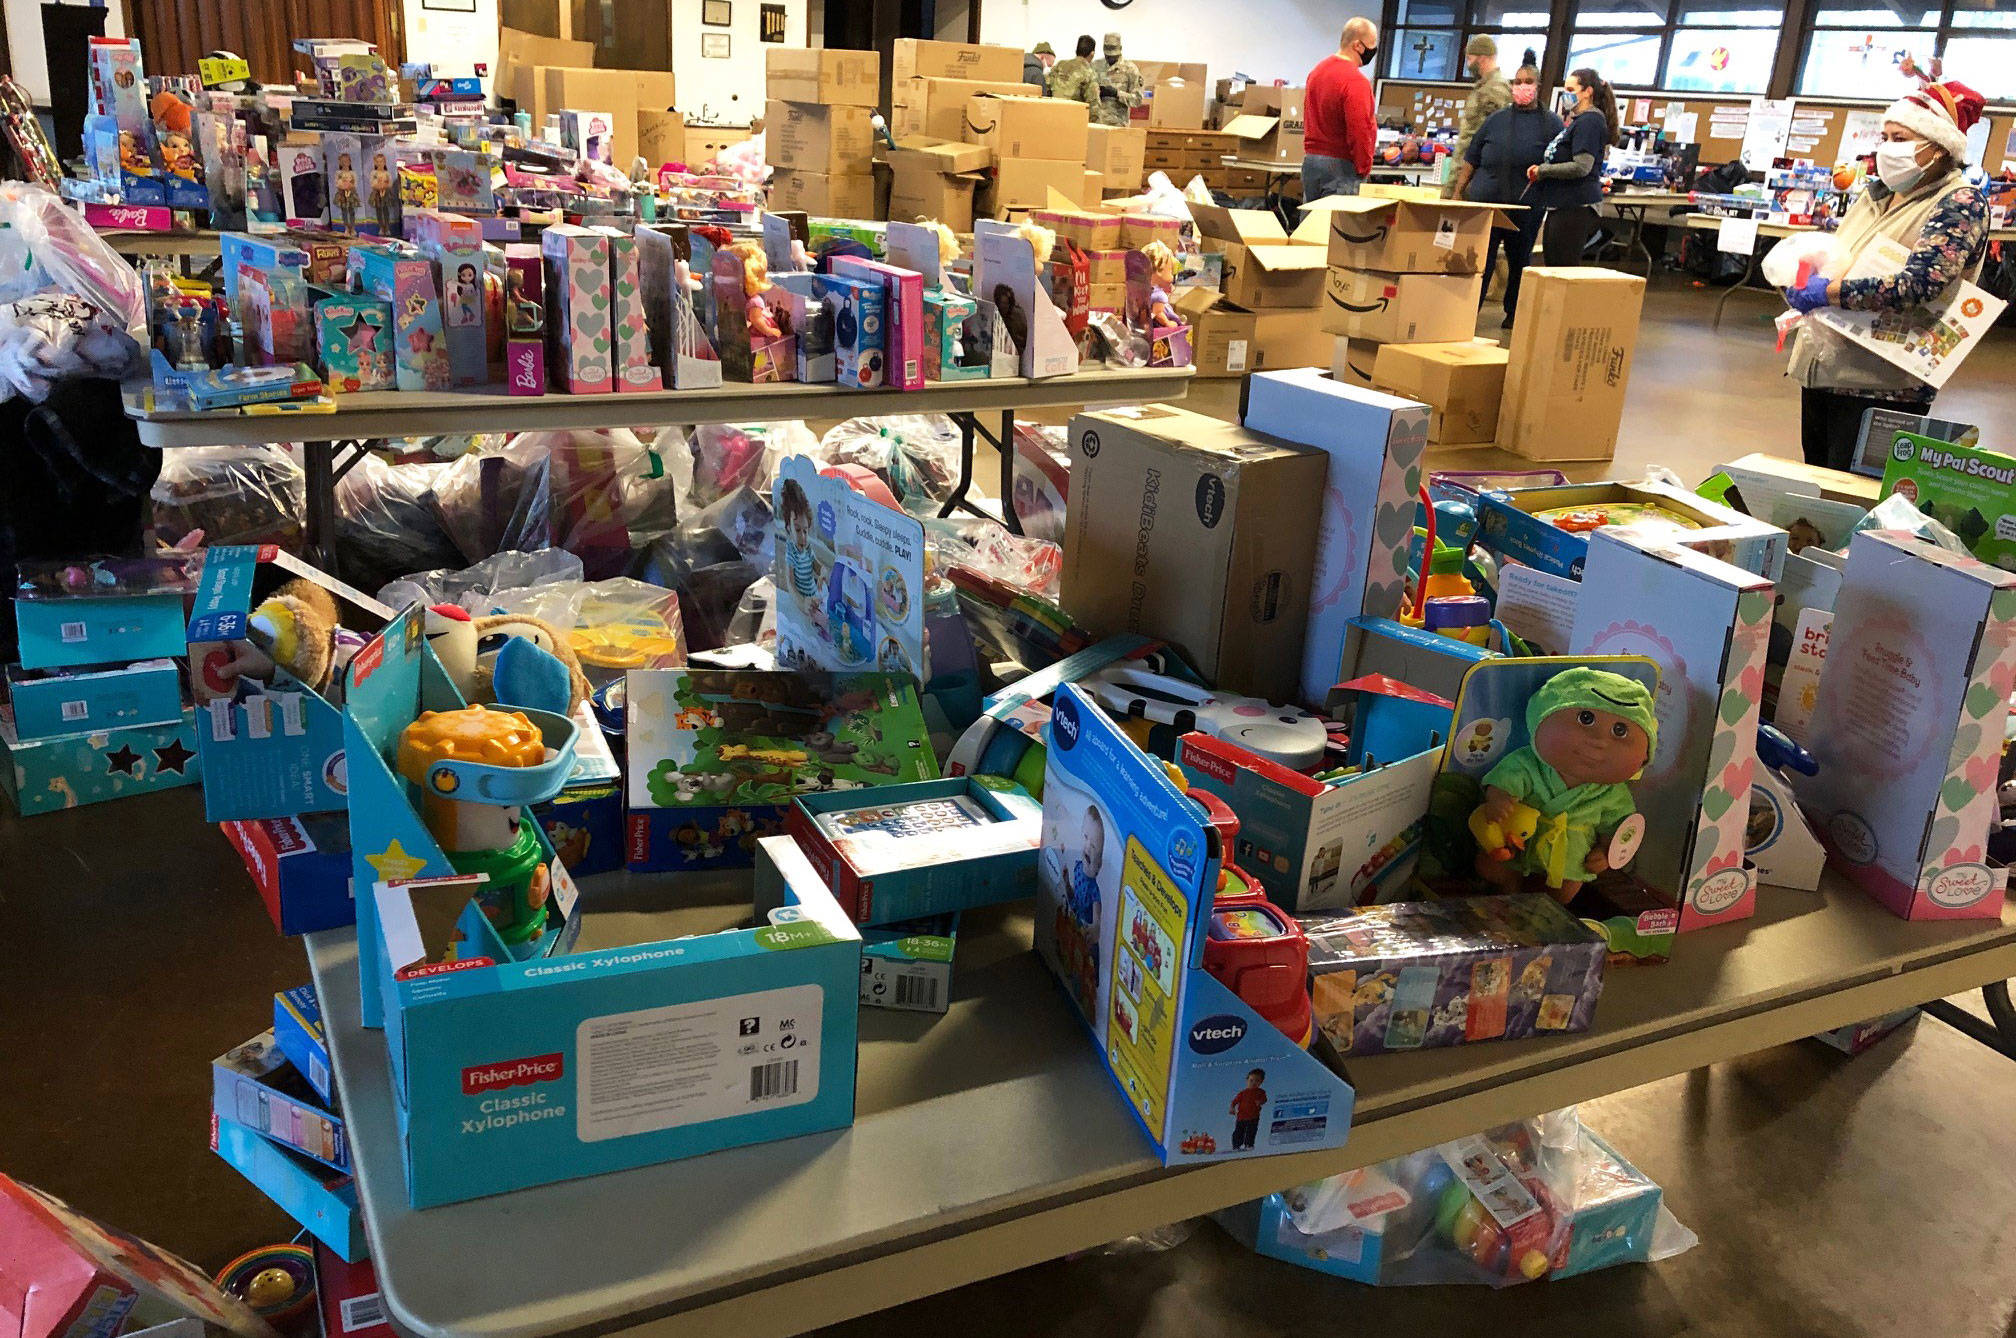 Volunteers dropped off hundreds of toys Dec. 18 at Kent Lutheran Church from the annual Kent firefighters Toys of Joy drive to be distributed to children through the Kent Food Bank. COURTESY PHOTO, Puget Sound Fire